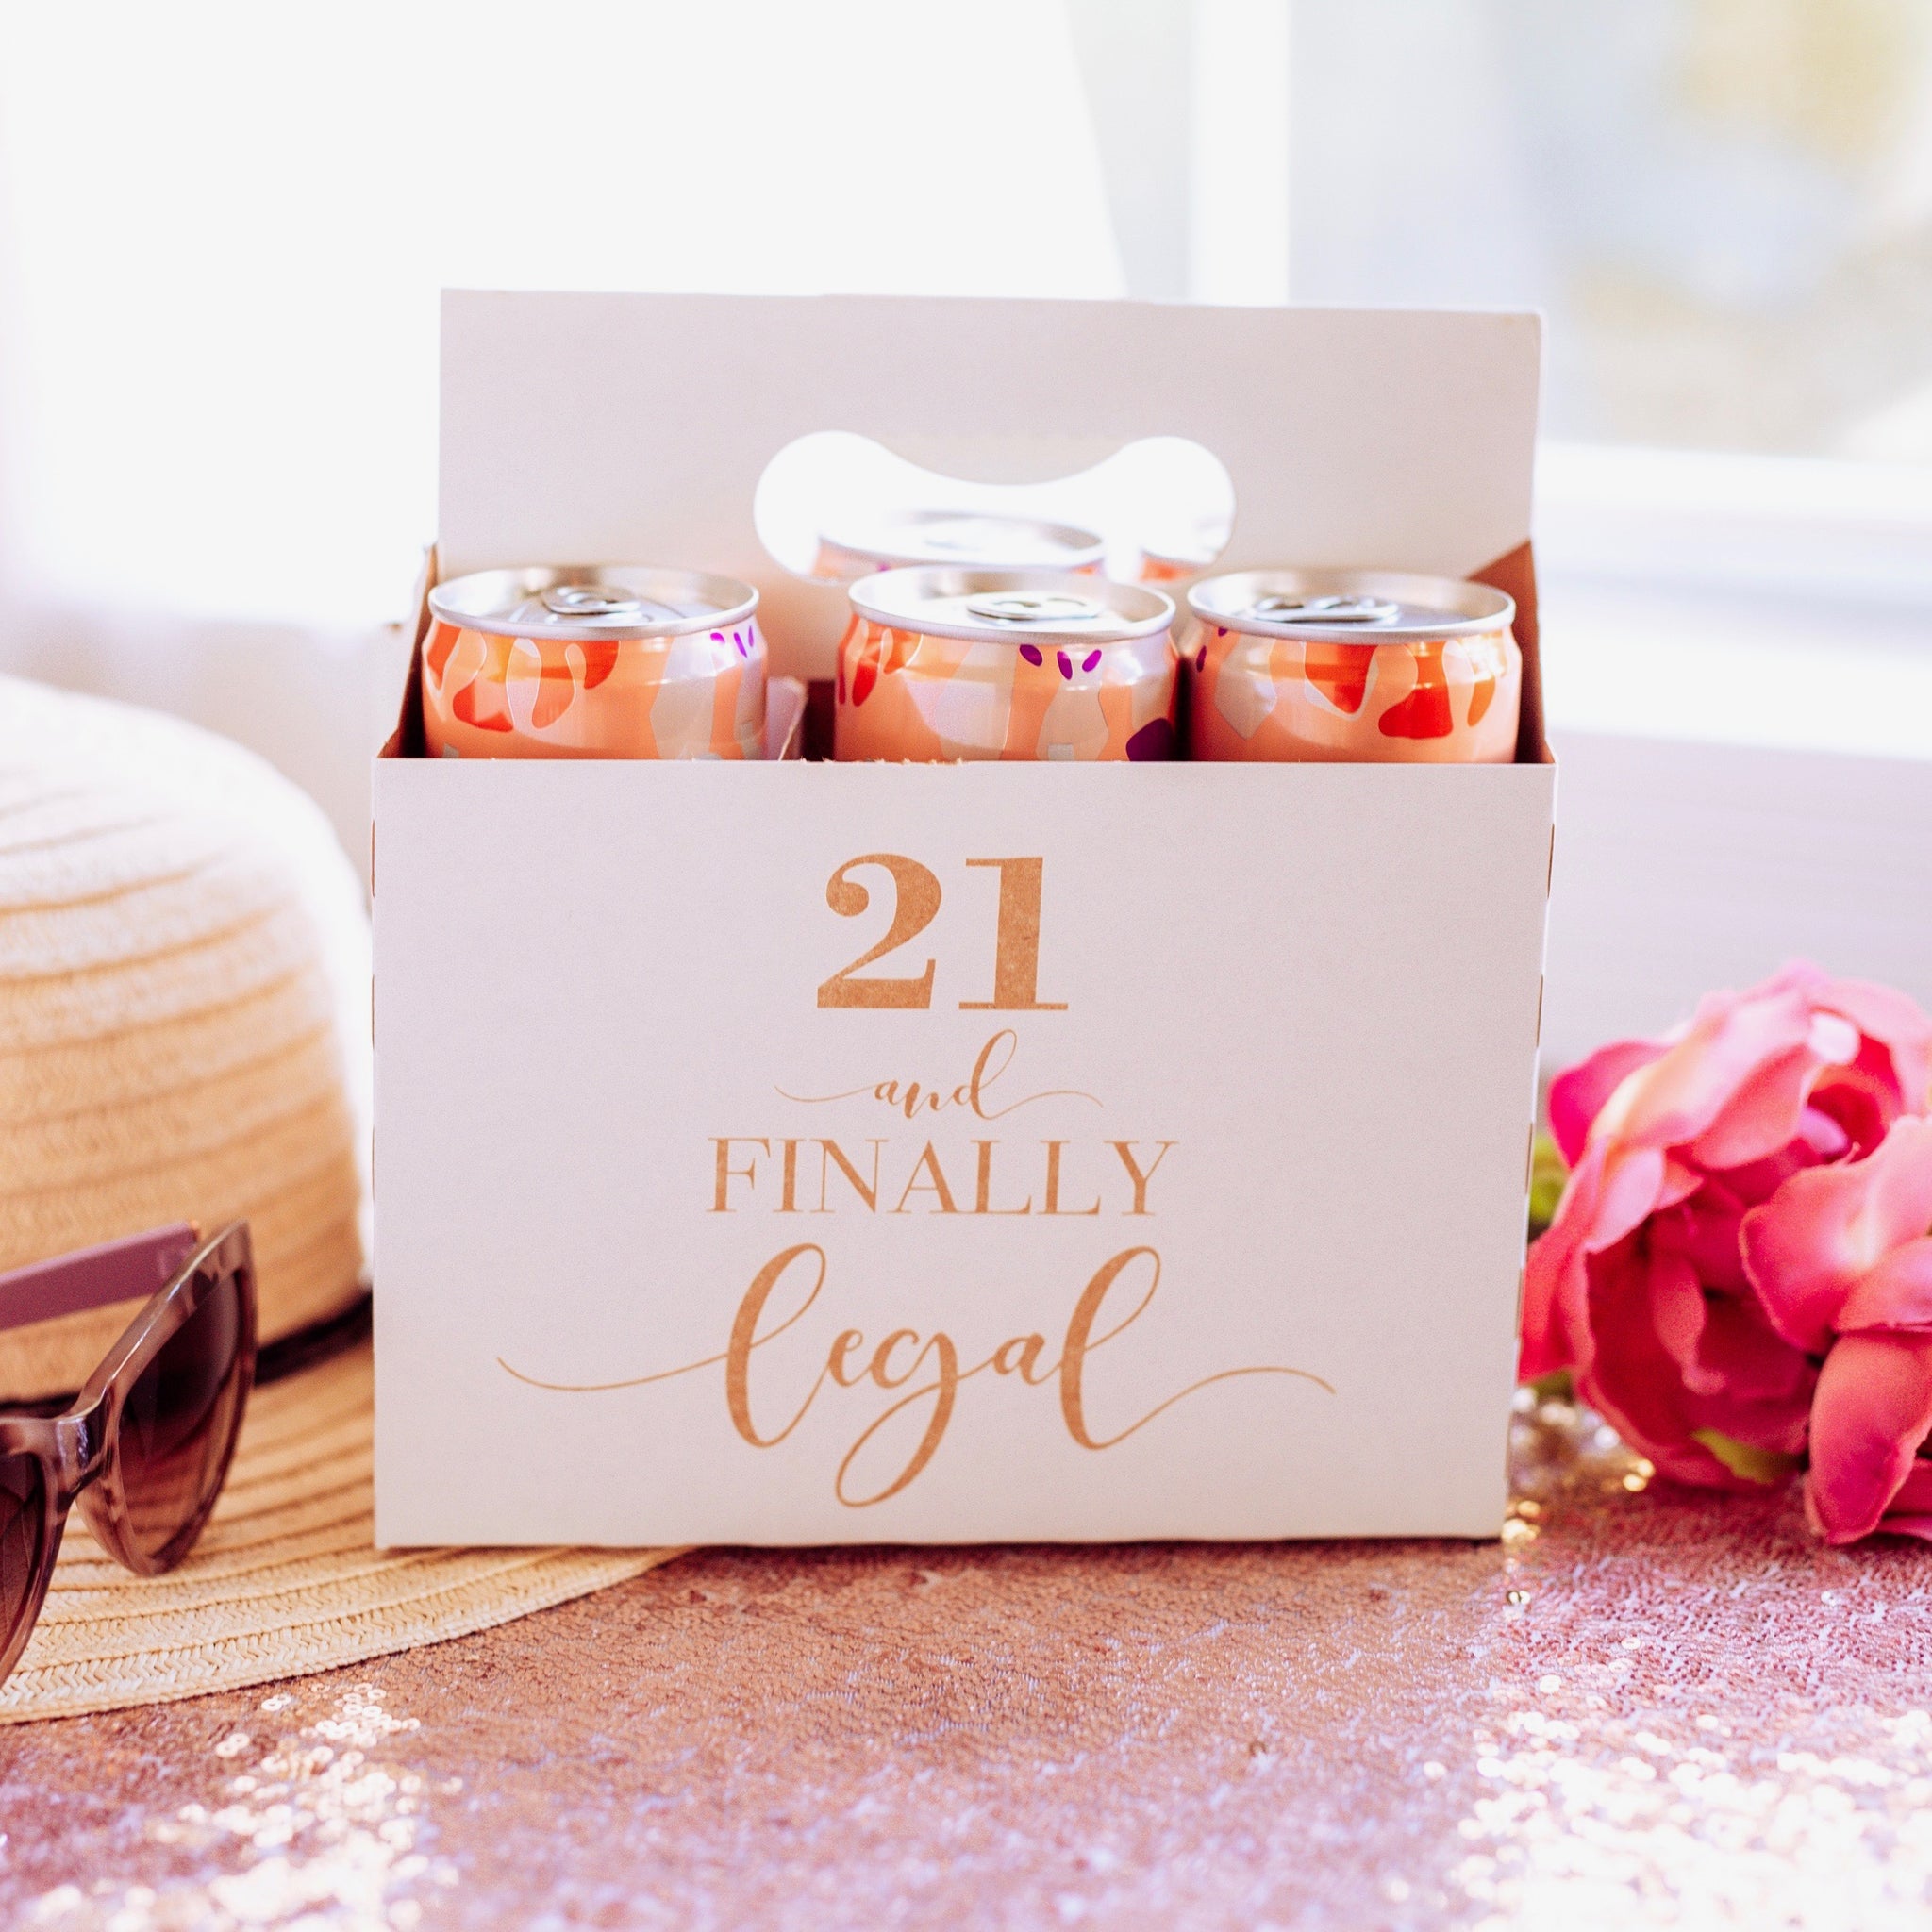 21st Birthday Gift Ideas for Him, Birthday Party Decorations for 21st -  Sugar Crush Co.